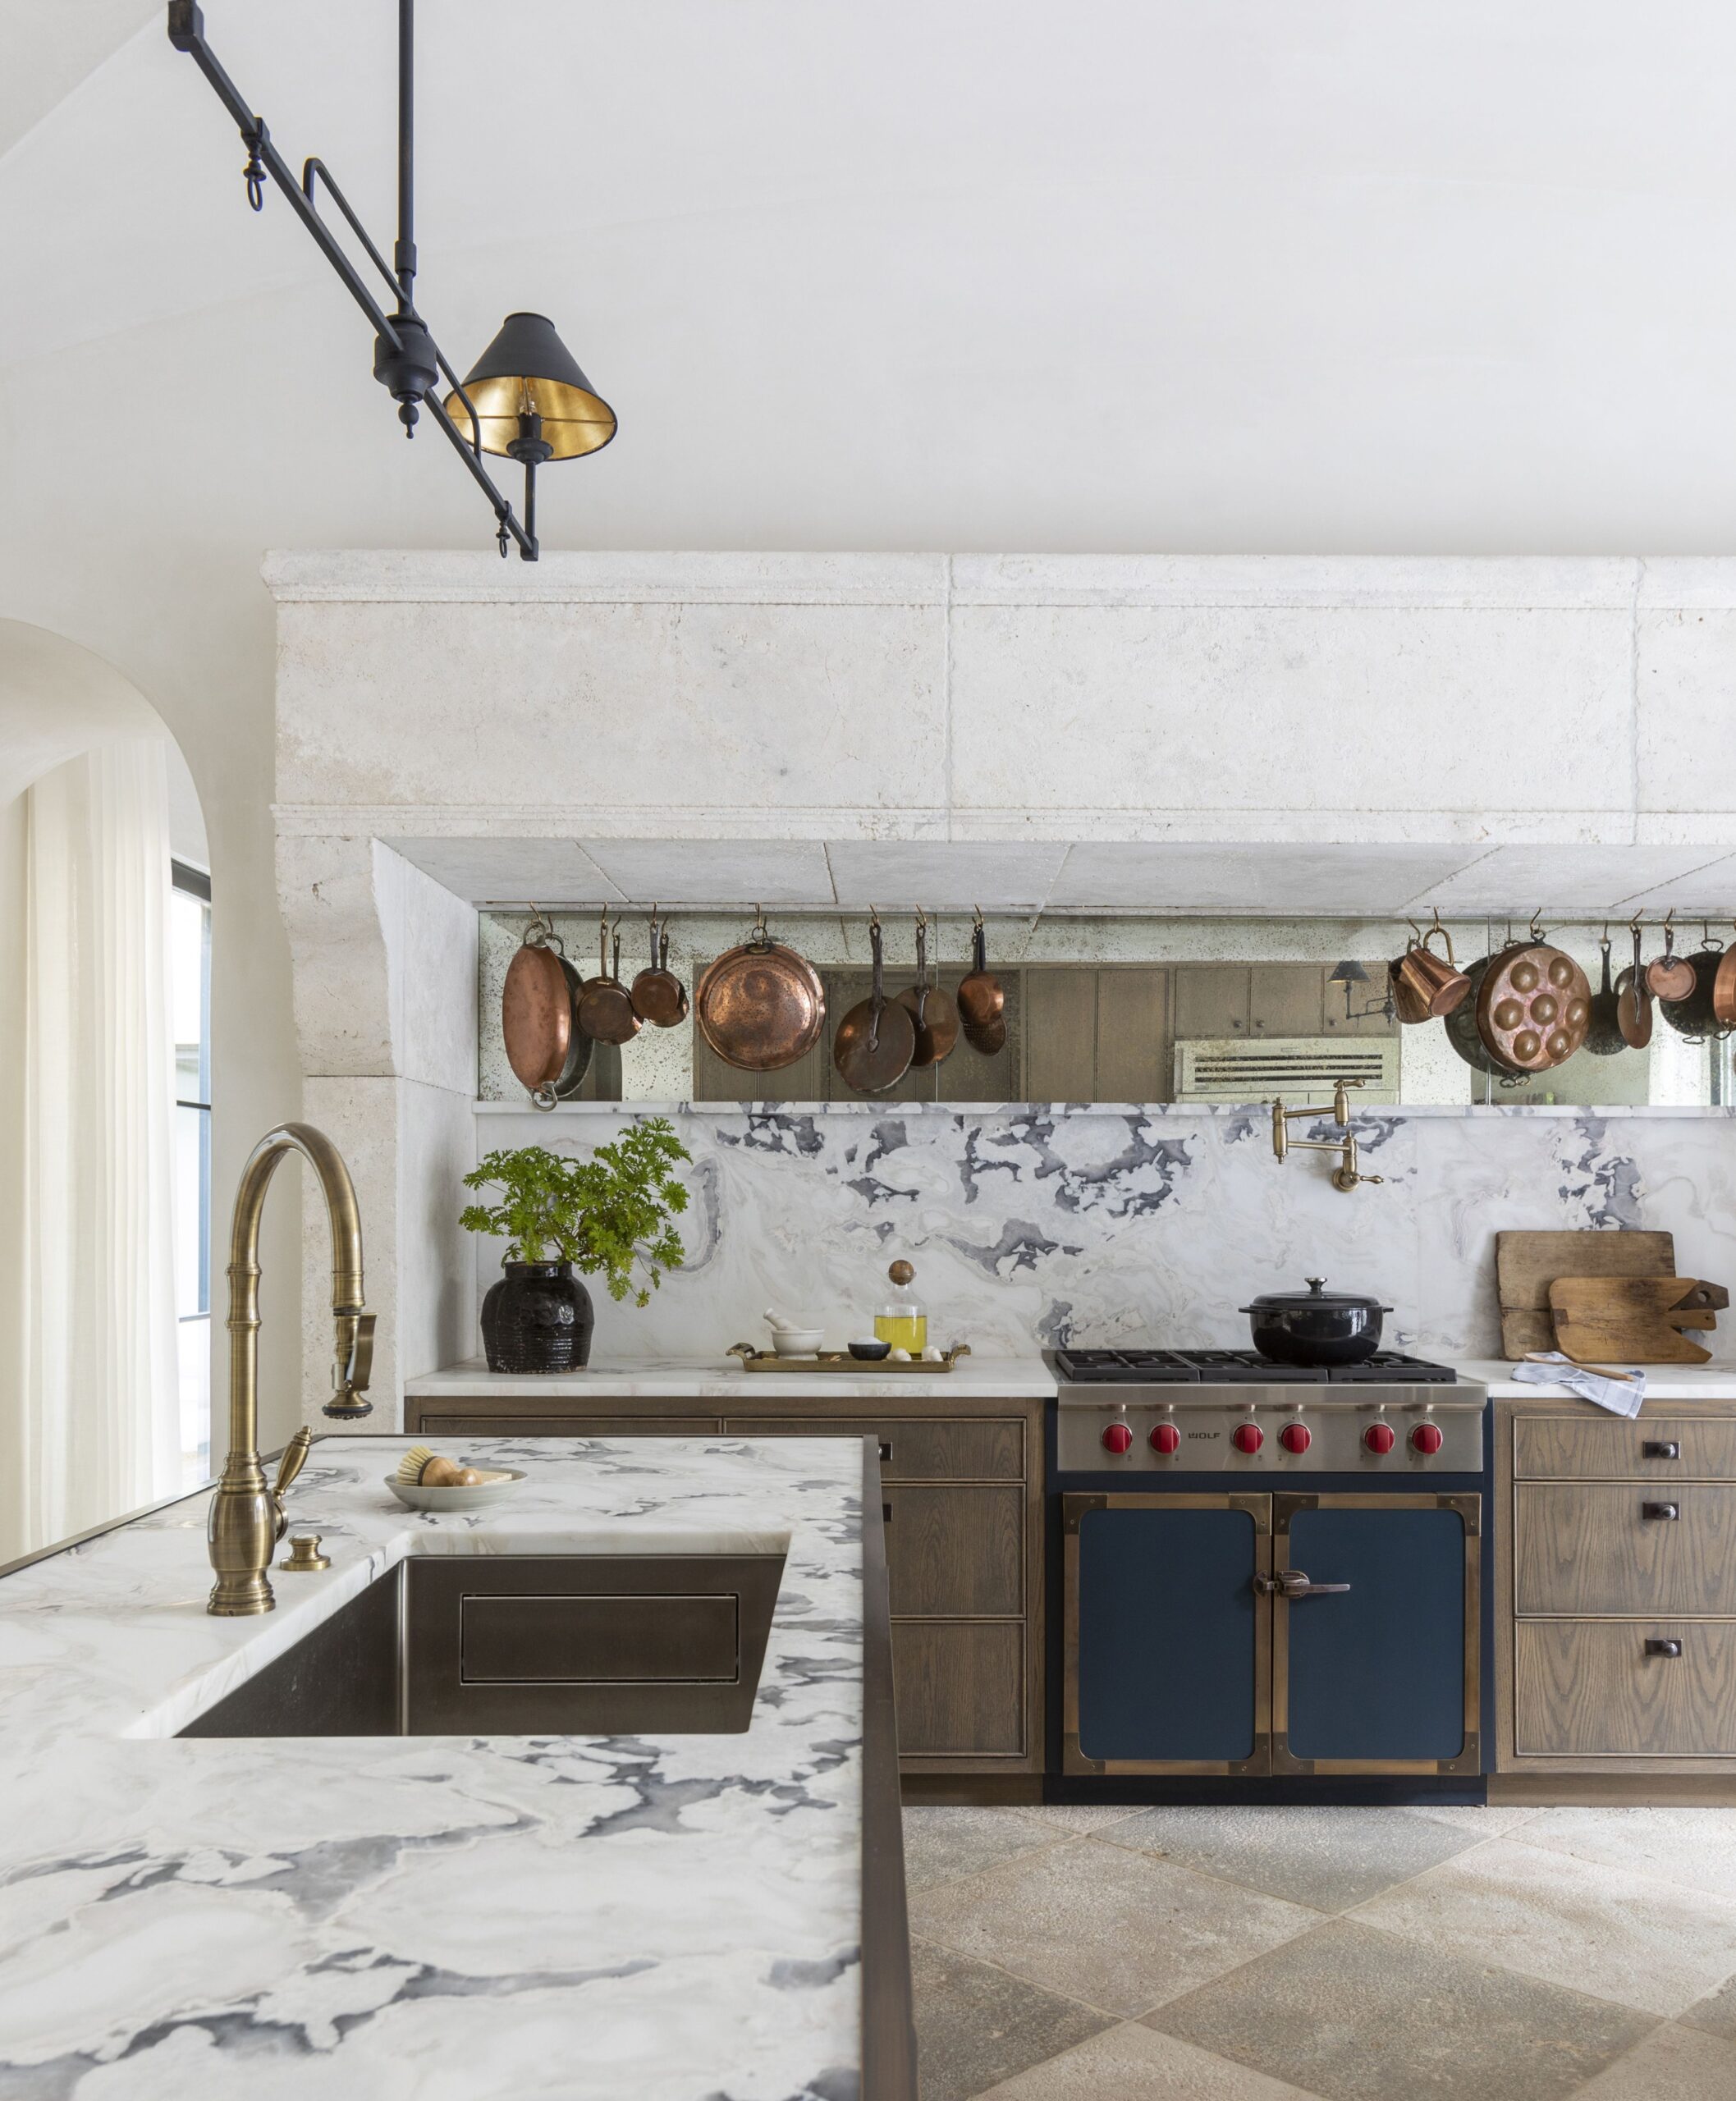 The Biggest 10 Kitchen Trends, According to Experts - what is the latest trend in kitchen cabinets?